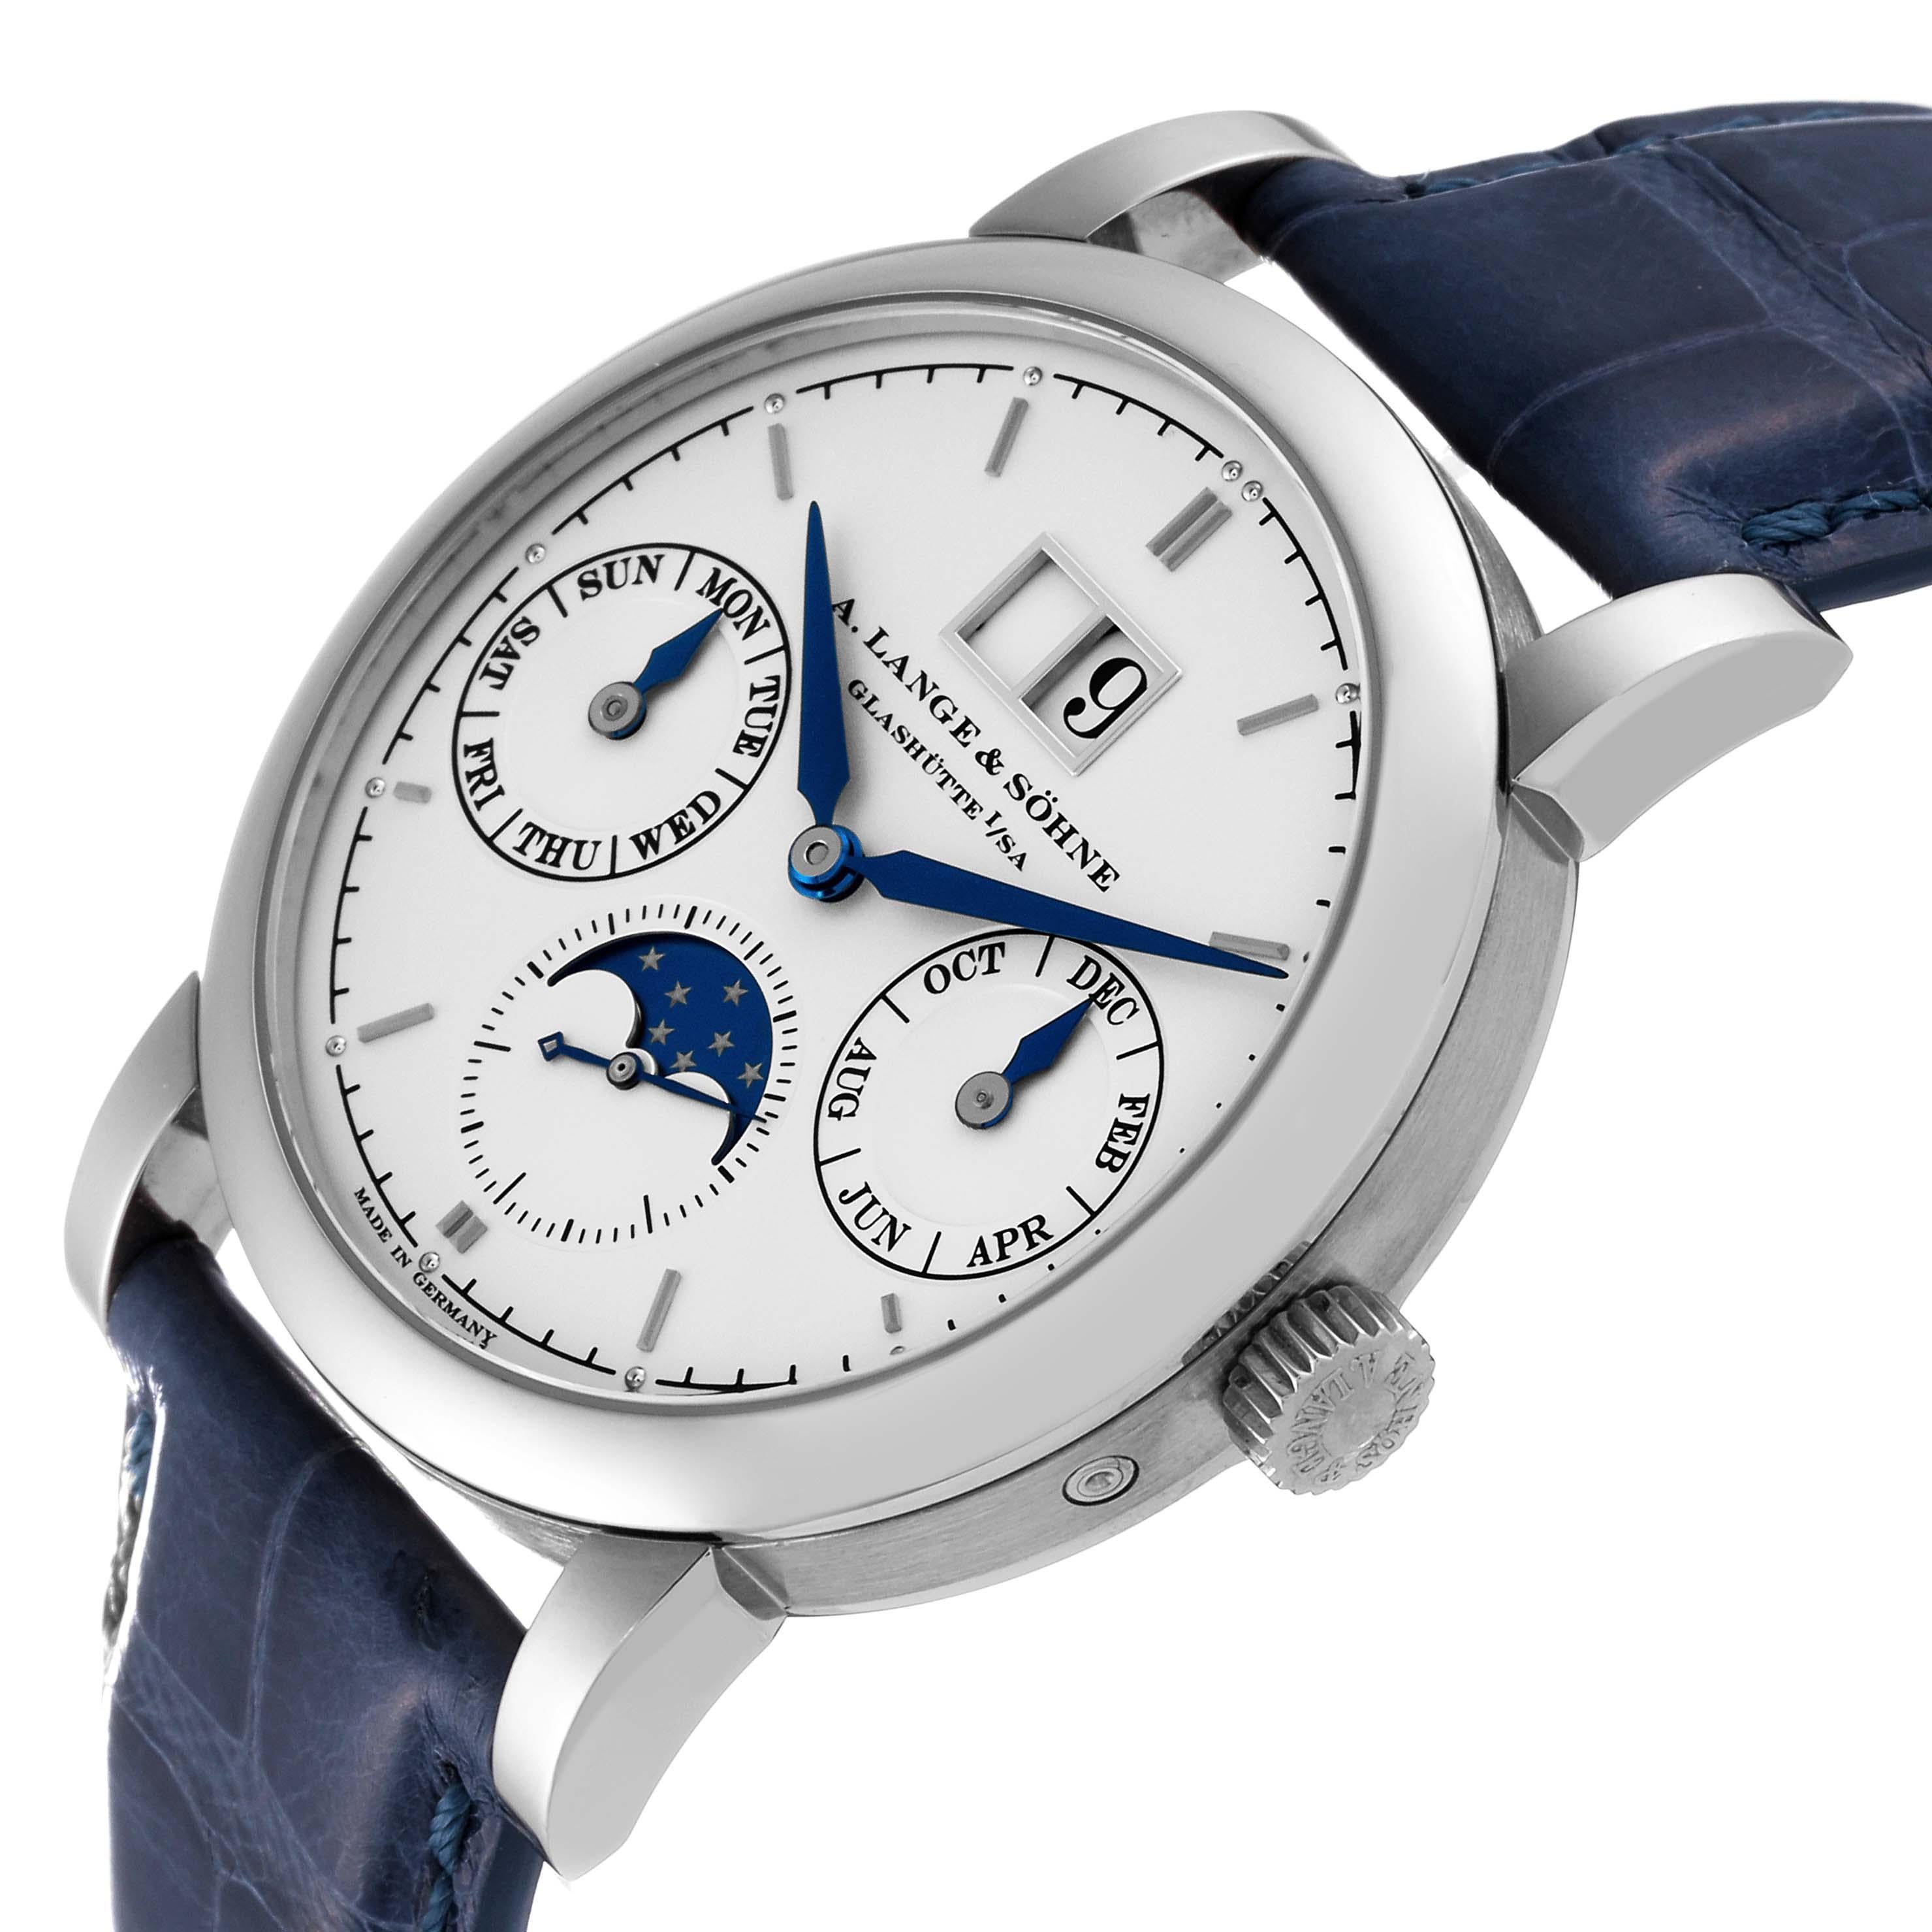 A. Lange and Sohne Saxonia Annual Calendar White Gold Mens Watch 330.026. Automatic self-winding movement. 18k white gold case 38.5 mm in diameter. 9.8 mm case thickness. Transparent exhibition sapphire crystal caseback. . Scratch resistant sapphire